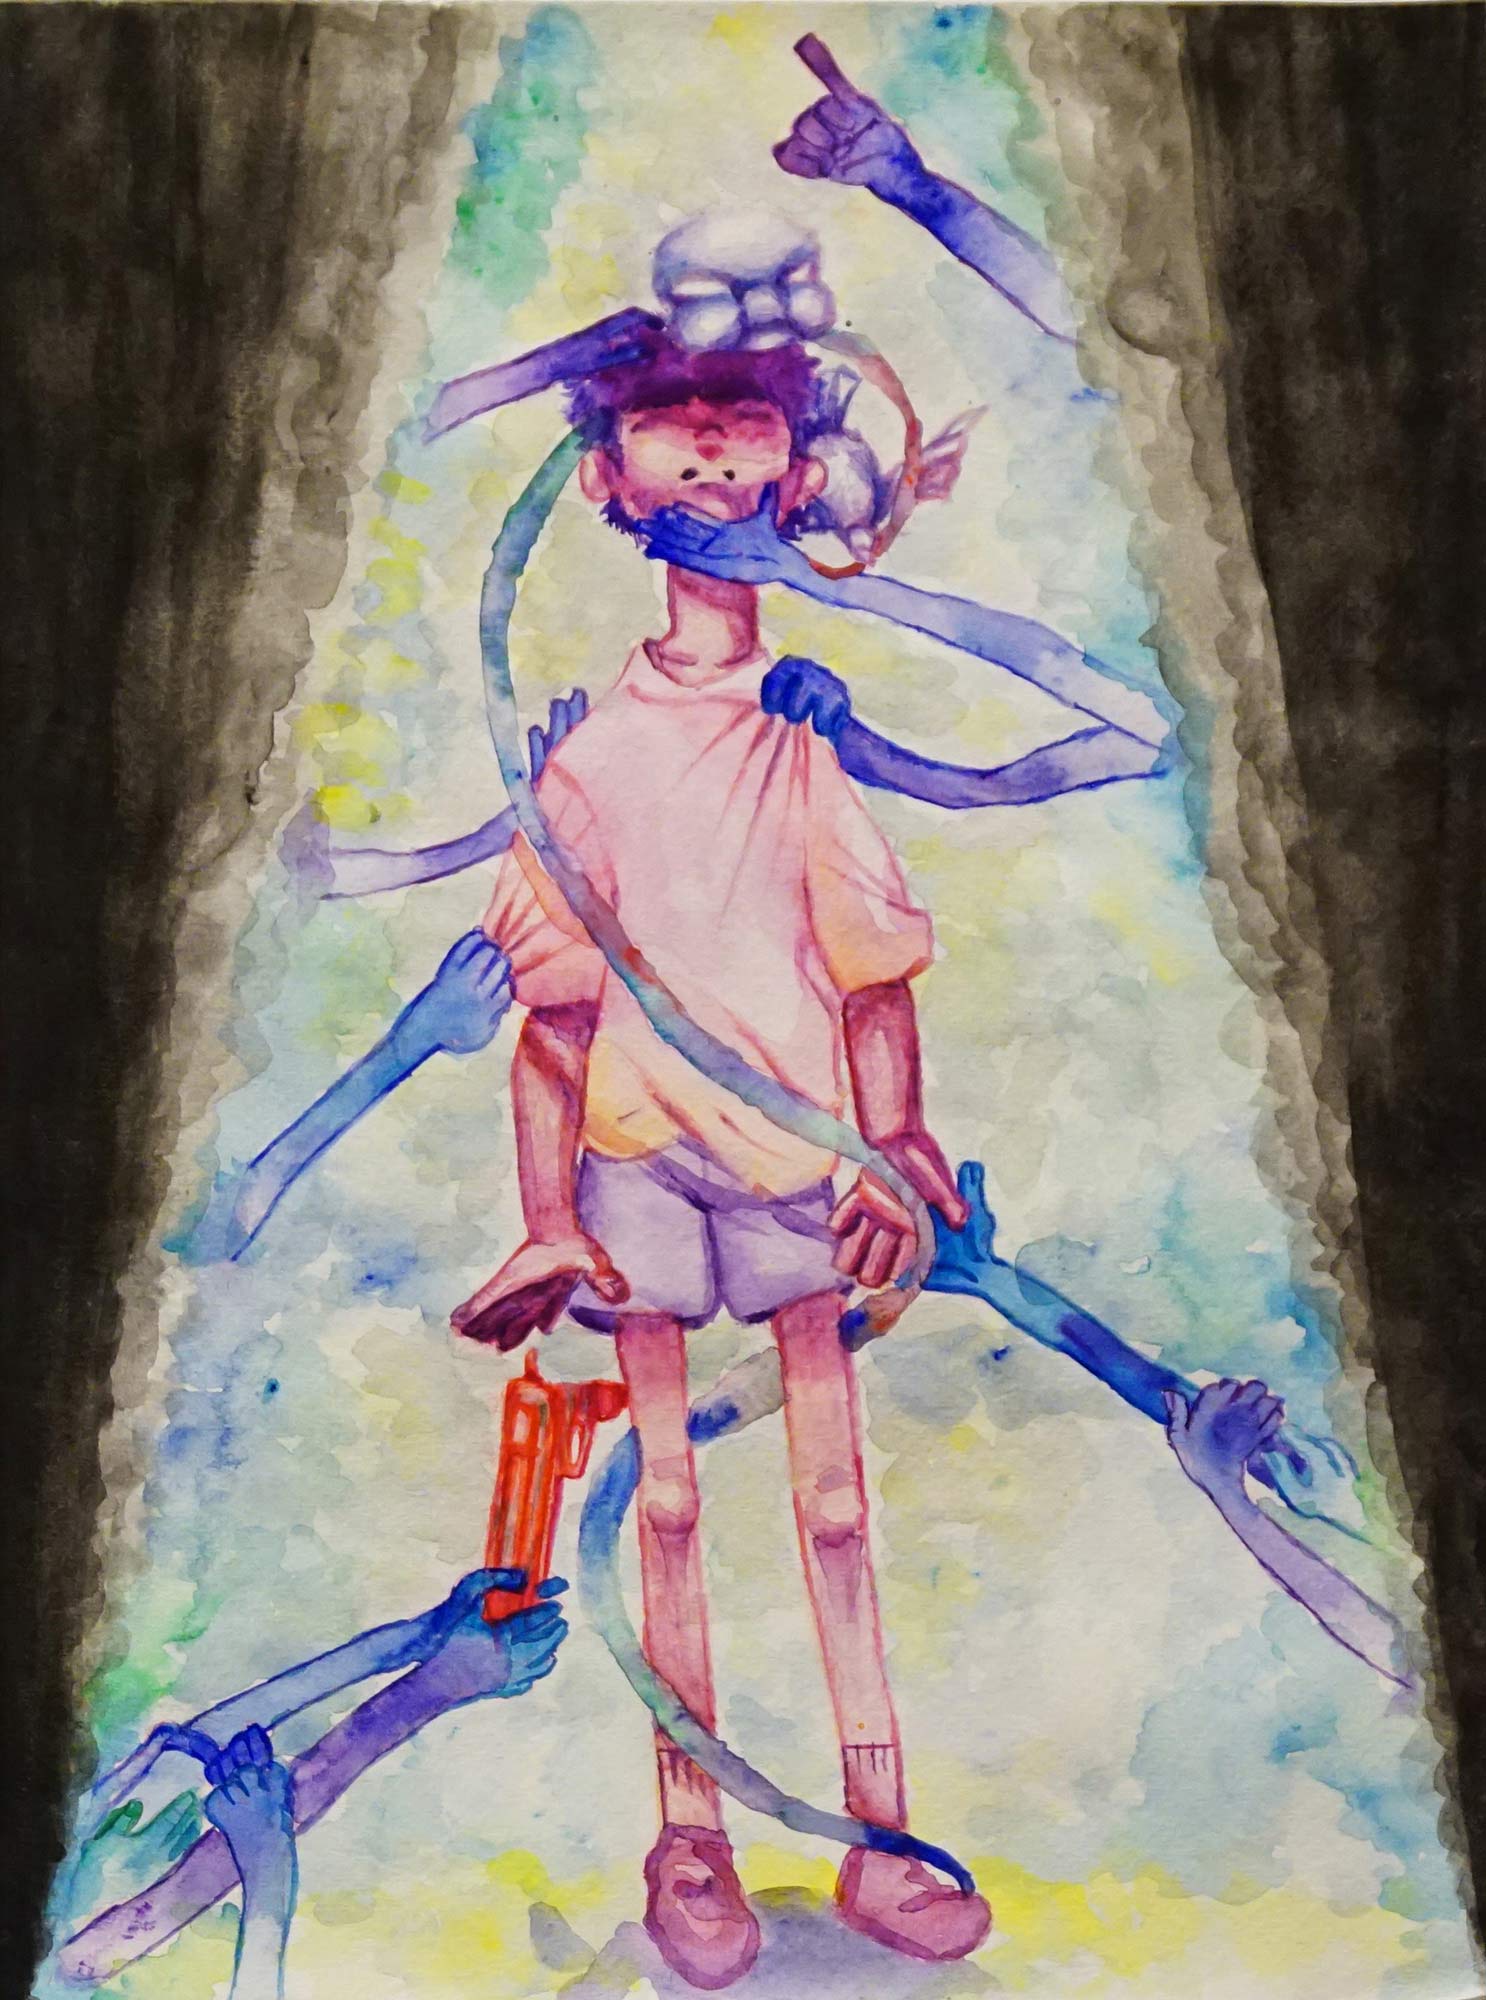 A watercolor painting of a boy held by many arms